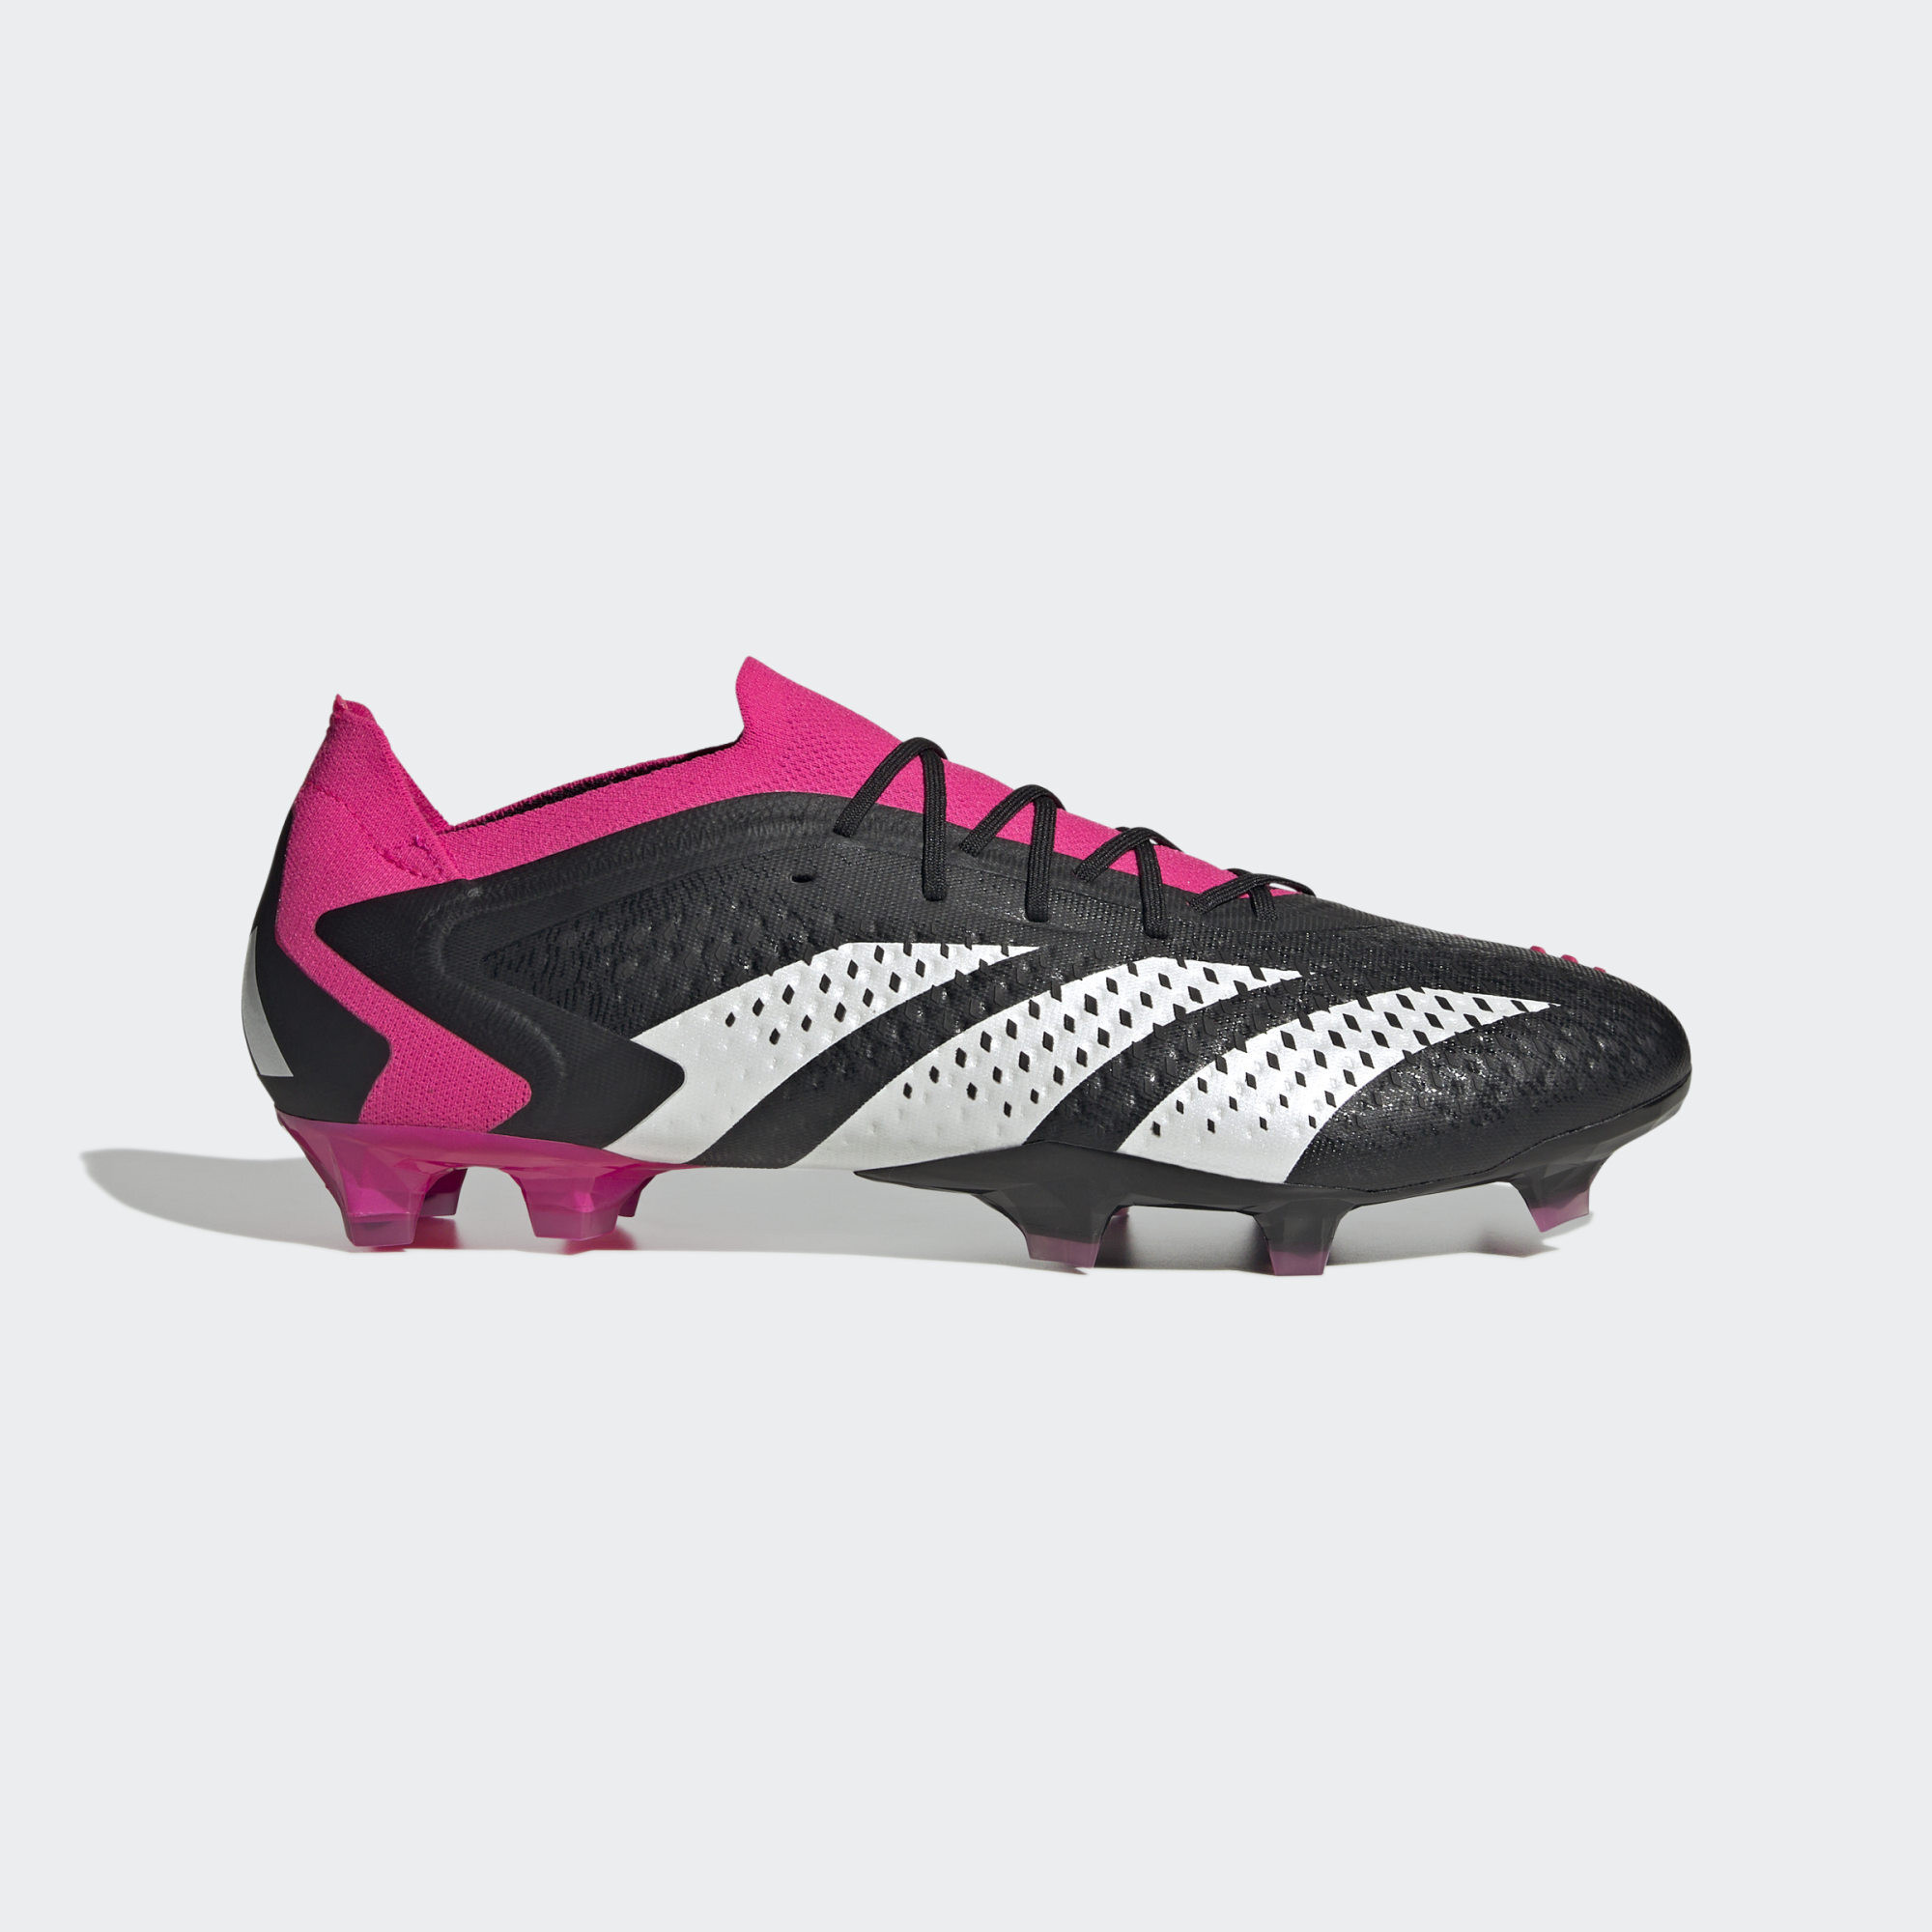 adidas Predator Accuracy.1 Low Firm Ground Boots (9000146406_68966)